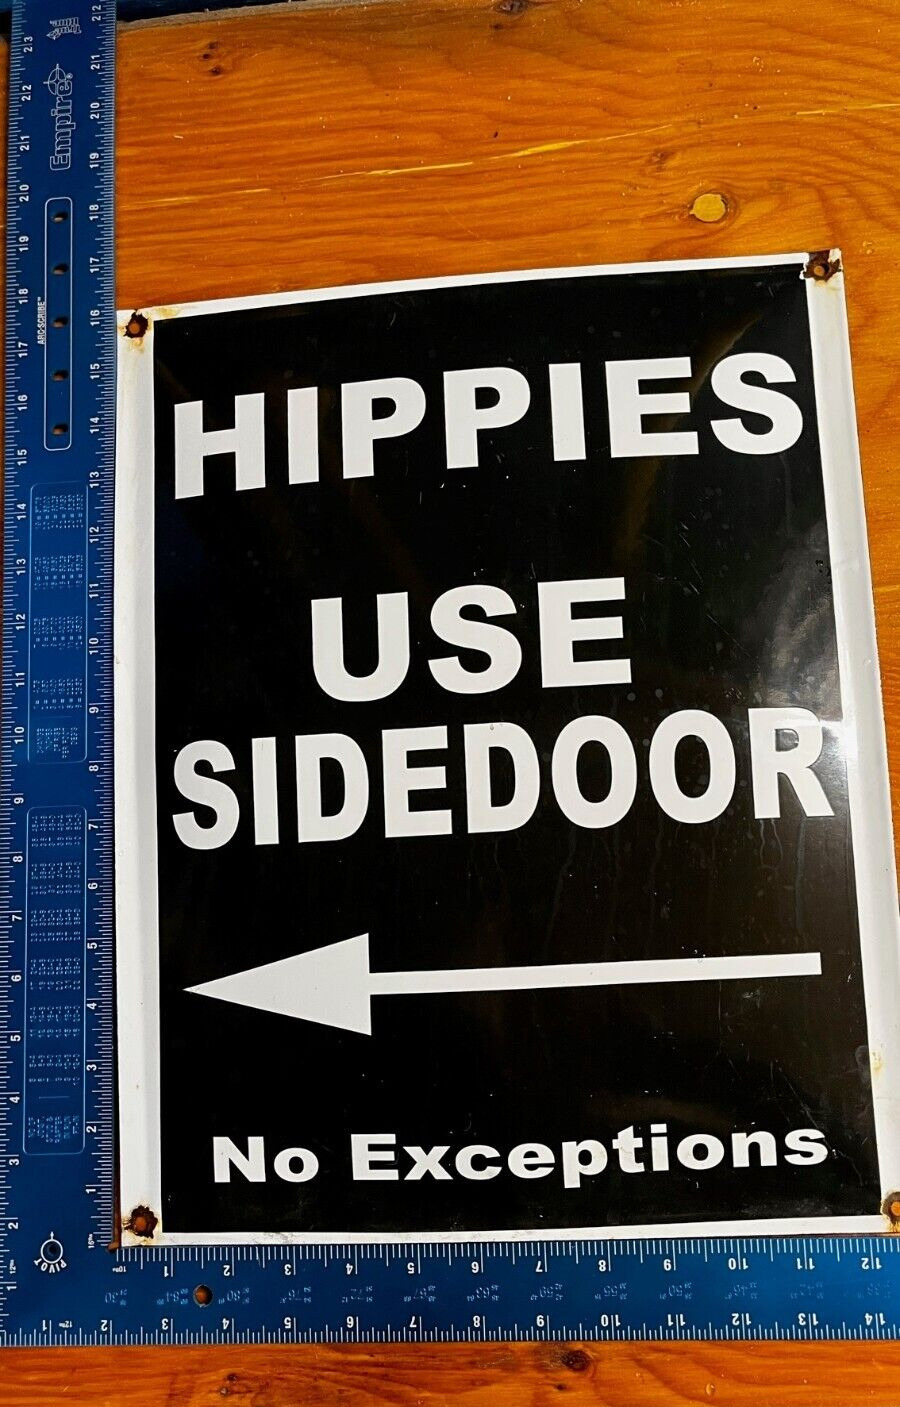 Vintage HIPPIES USE SIDEDOOR Porcelain Sign RARE